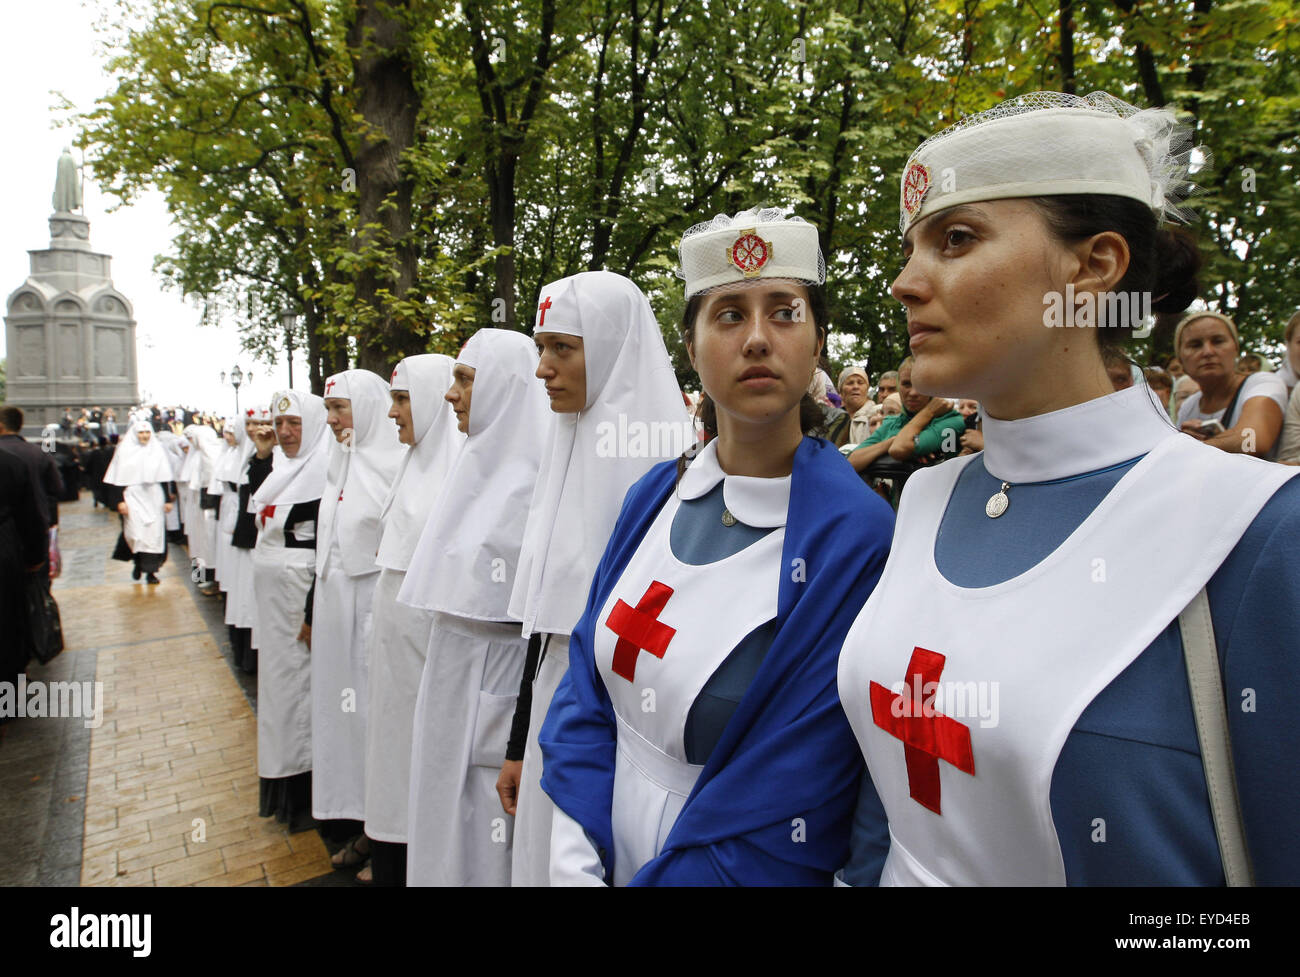 Kiev, Ukraine. 27th July, 2015. Nuns wait for a prayer service marking the 1000th anniversary of the Repose of Vladimir the Great at St. Vladimirs Hill in Kiev, Ukraine, 27 July 2015. The Grand Prince of Kiev, Vladimir the Great, also known as St. Vladimir, Vladimir the Baptizer of Rus and Vladimir the Red Sun, was the first Christian ruler in the Kievan Rus who christianized the region. Orthodox believers will mark the 1027th anniversary of Kievan Rus Christianization on 28 July. © Serg Glovny/ZUMA Wire/Alamy Live News Stock Photo